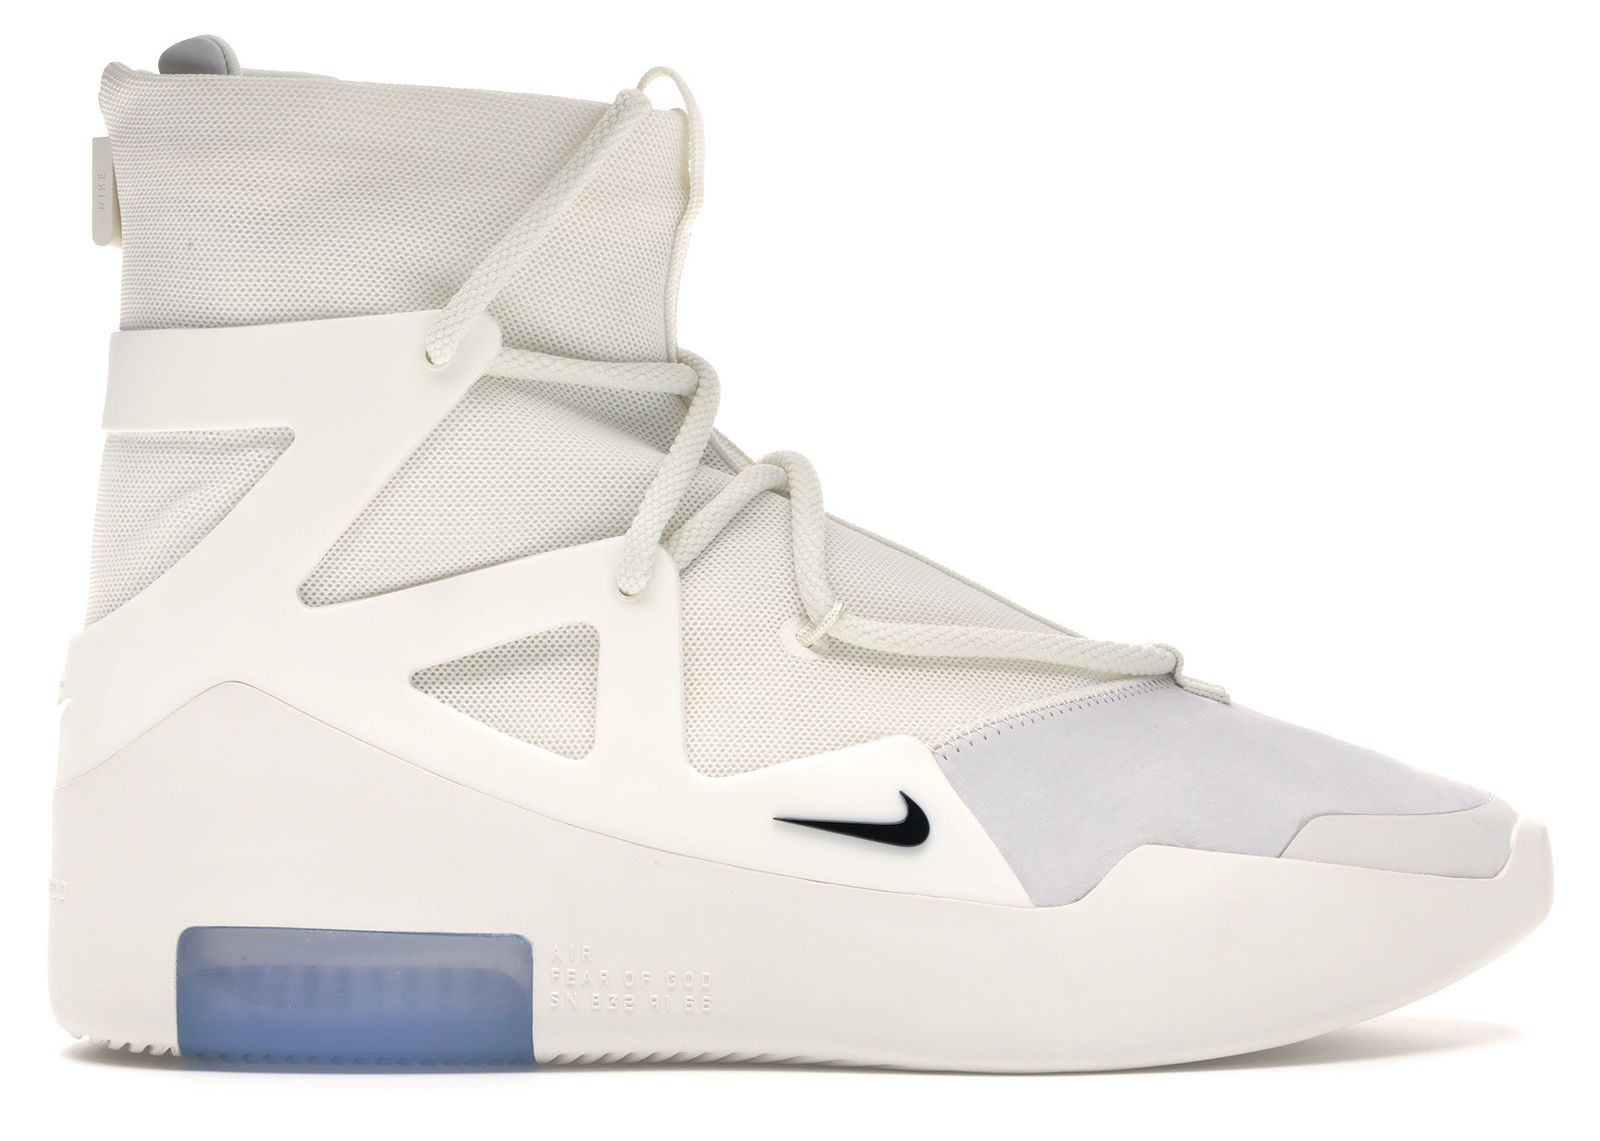 Nike Air Fear of God 1 String The Question Men's - AR4237-902 - US